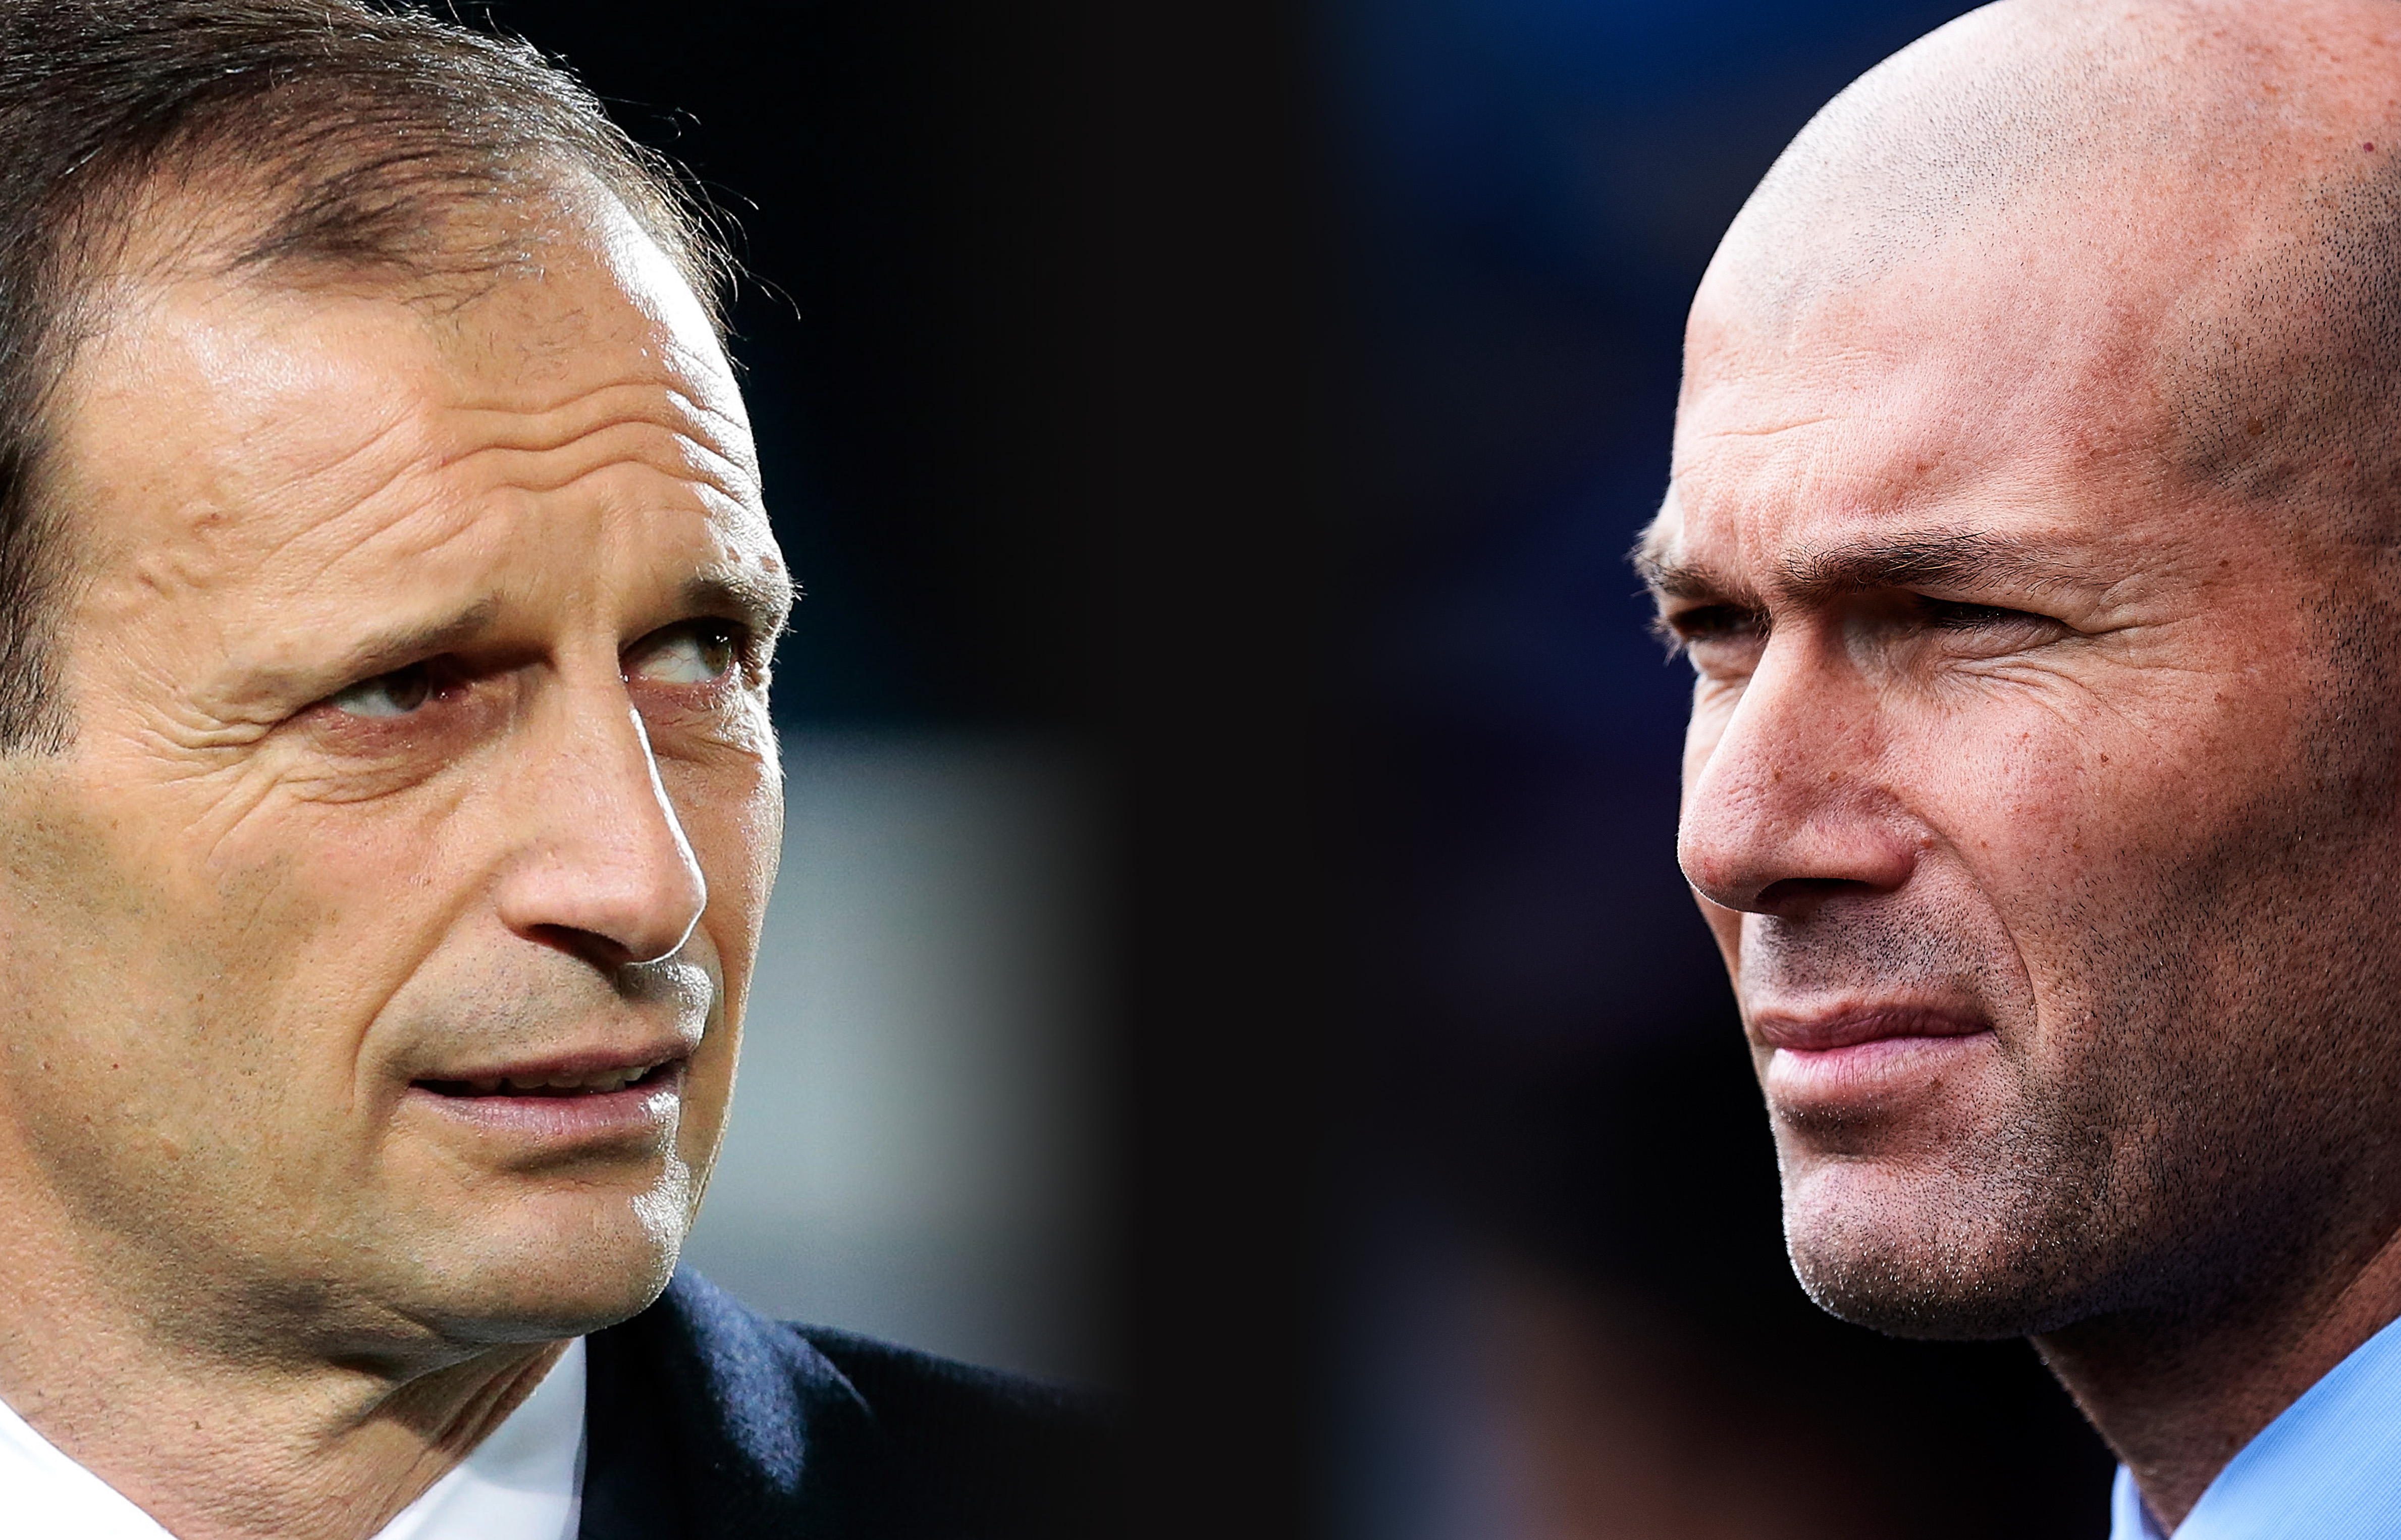 FILE PHOTO (EDITORS NOTE: GRADIENT ADDED - COMPOSITE OF TWO IMAGES - Image numbers (L) 674881574 and 930048502) In this composite image a comparison has been made between Juventus FC Head coach Massimiliano Allegri  and Head coach Zinedine Zidane of Real Madrid .  Juventus and  Real Madrid meet in a UEFA Champions League Quarter Final over 2 legs.  ***LEFT IMAGE*** BERGAMO, ITALY - APRIL 28: Juventus FC coach Massimiliano Allegri looks on before the Serie A match between Atalanta BC and Juventus FC at Stadio Atleti Azzurri d'Italia on April 28, 2017 in Bergamo, Italy. (Photo by Emilio Andreoli/Getty Images) ***RIGHT IMAGE***  EIBAR, SPAIN - MARCH 10: Head coach Zinedine Zidane of Real Madrid reacts during the La Liga match between SD Eibar and Real Madrid at Ipurua Municipal Stadium on March 10, 2018 in Eibar, Spain . (Photo by Juan Manuel Serrano Arce/Getty Images)